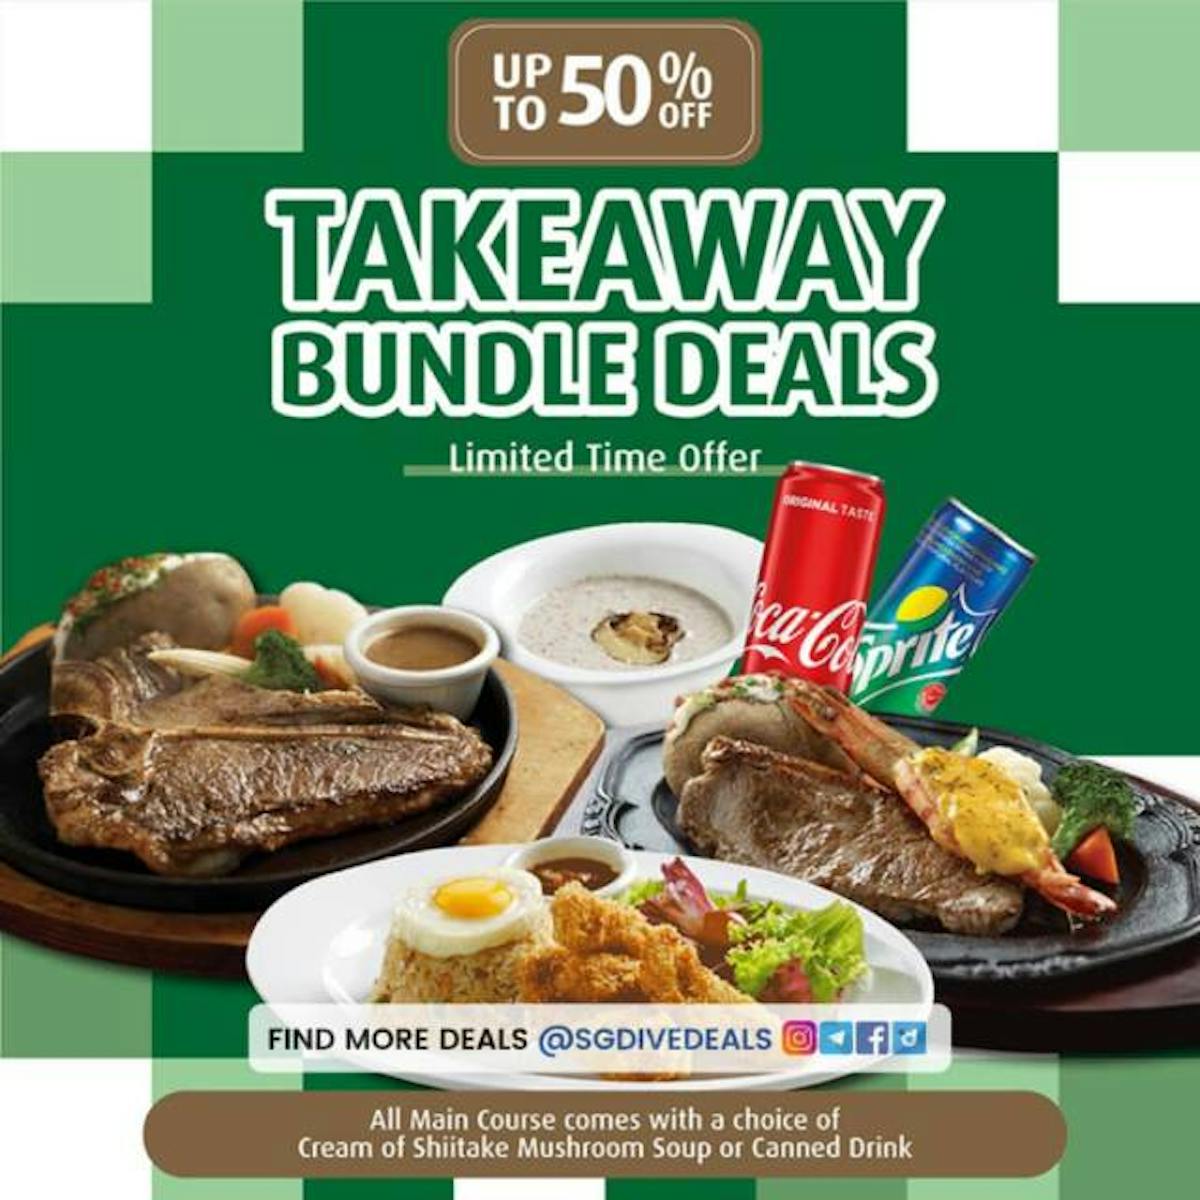 Takeaway Bundle Deals that go up to 50% off